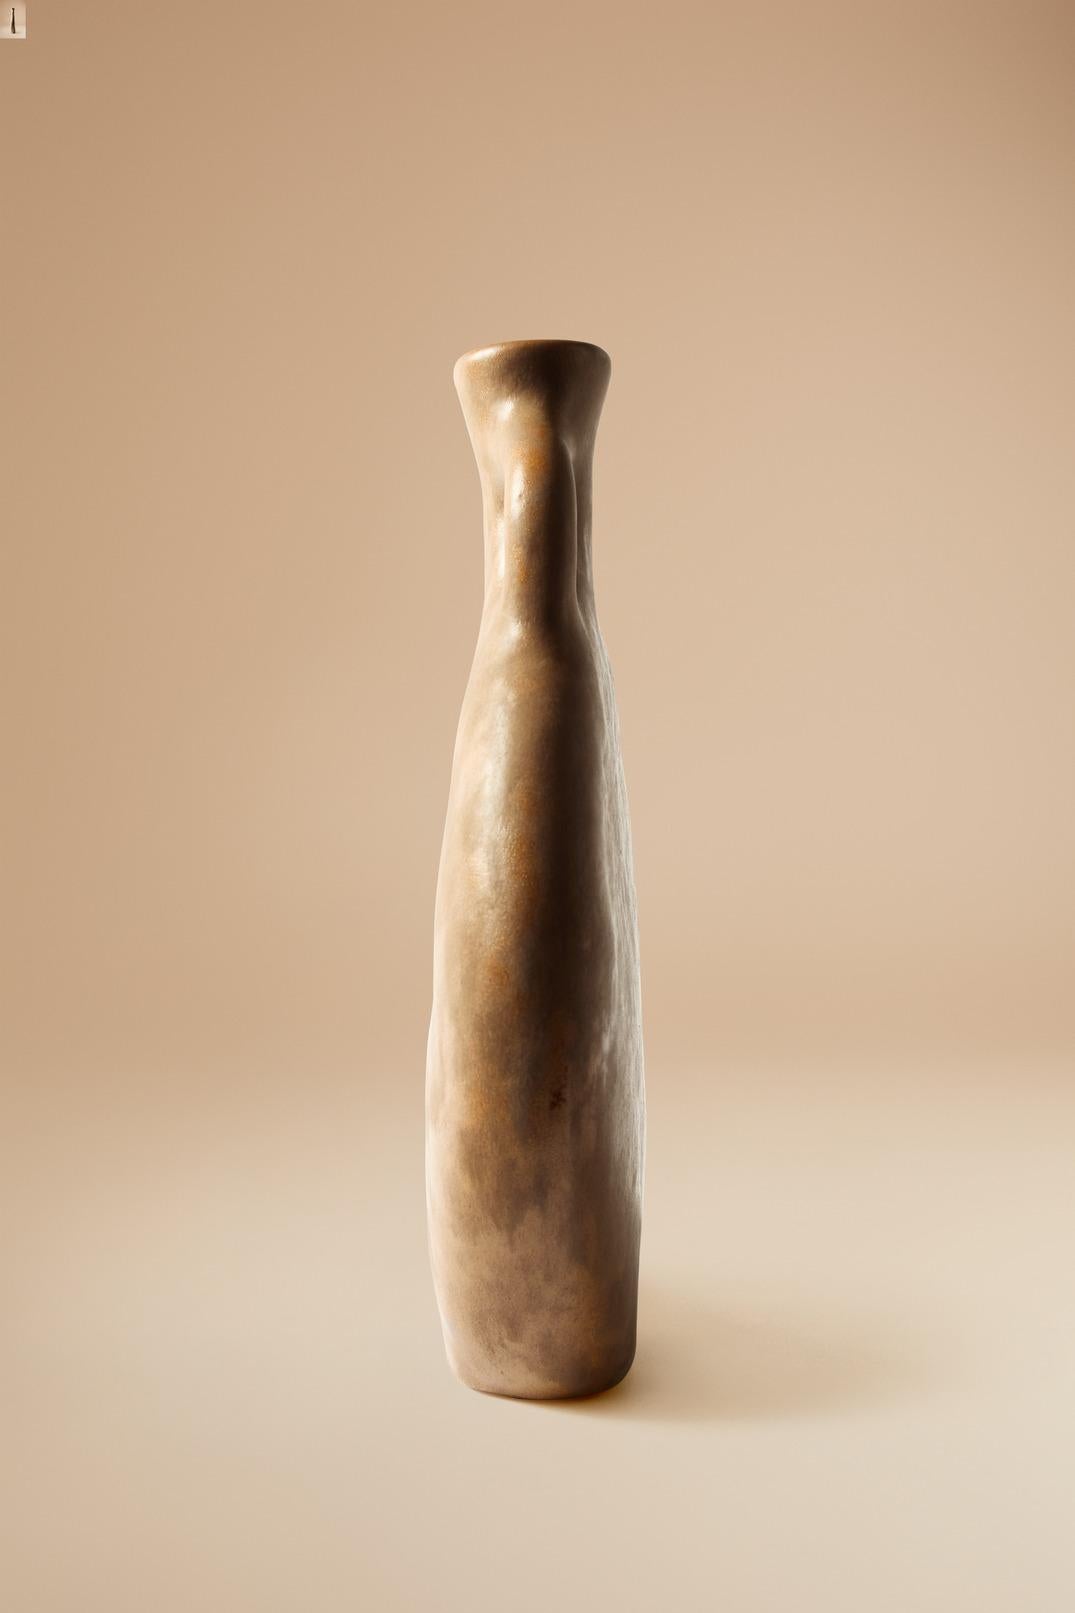 South African Vessel 03 in Smooth Stoneware Clay. Handmade by Jade Paton for Lemon For Sale